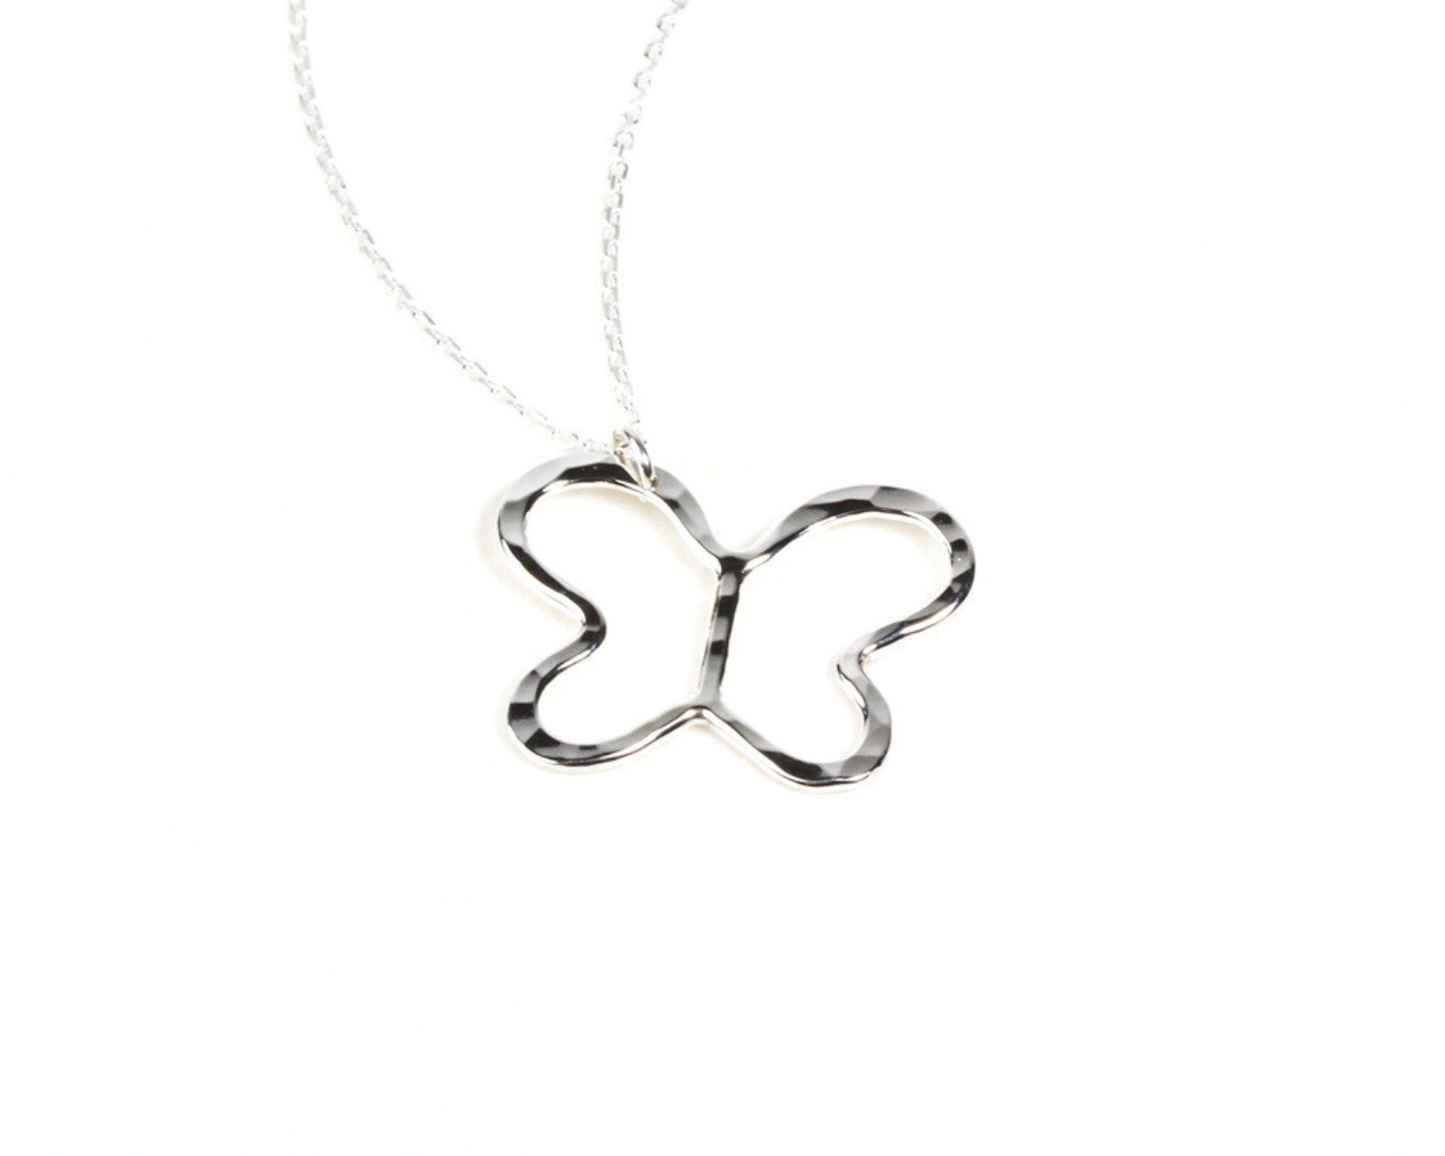 Enchanted Butterfly Necklace is hand made to order in fine metal, bringing the magic of the butterfly into every day. The minimalist butterfly pendant hangs from a single wing, giving it a playful tilt. Pictured here in Sterling Silver.